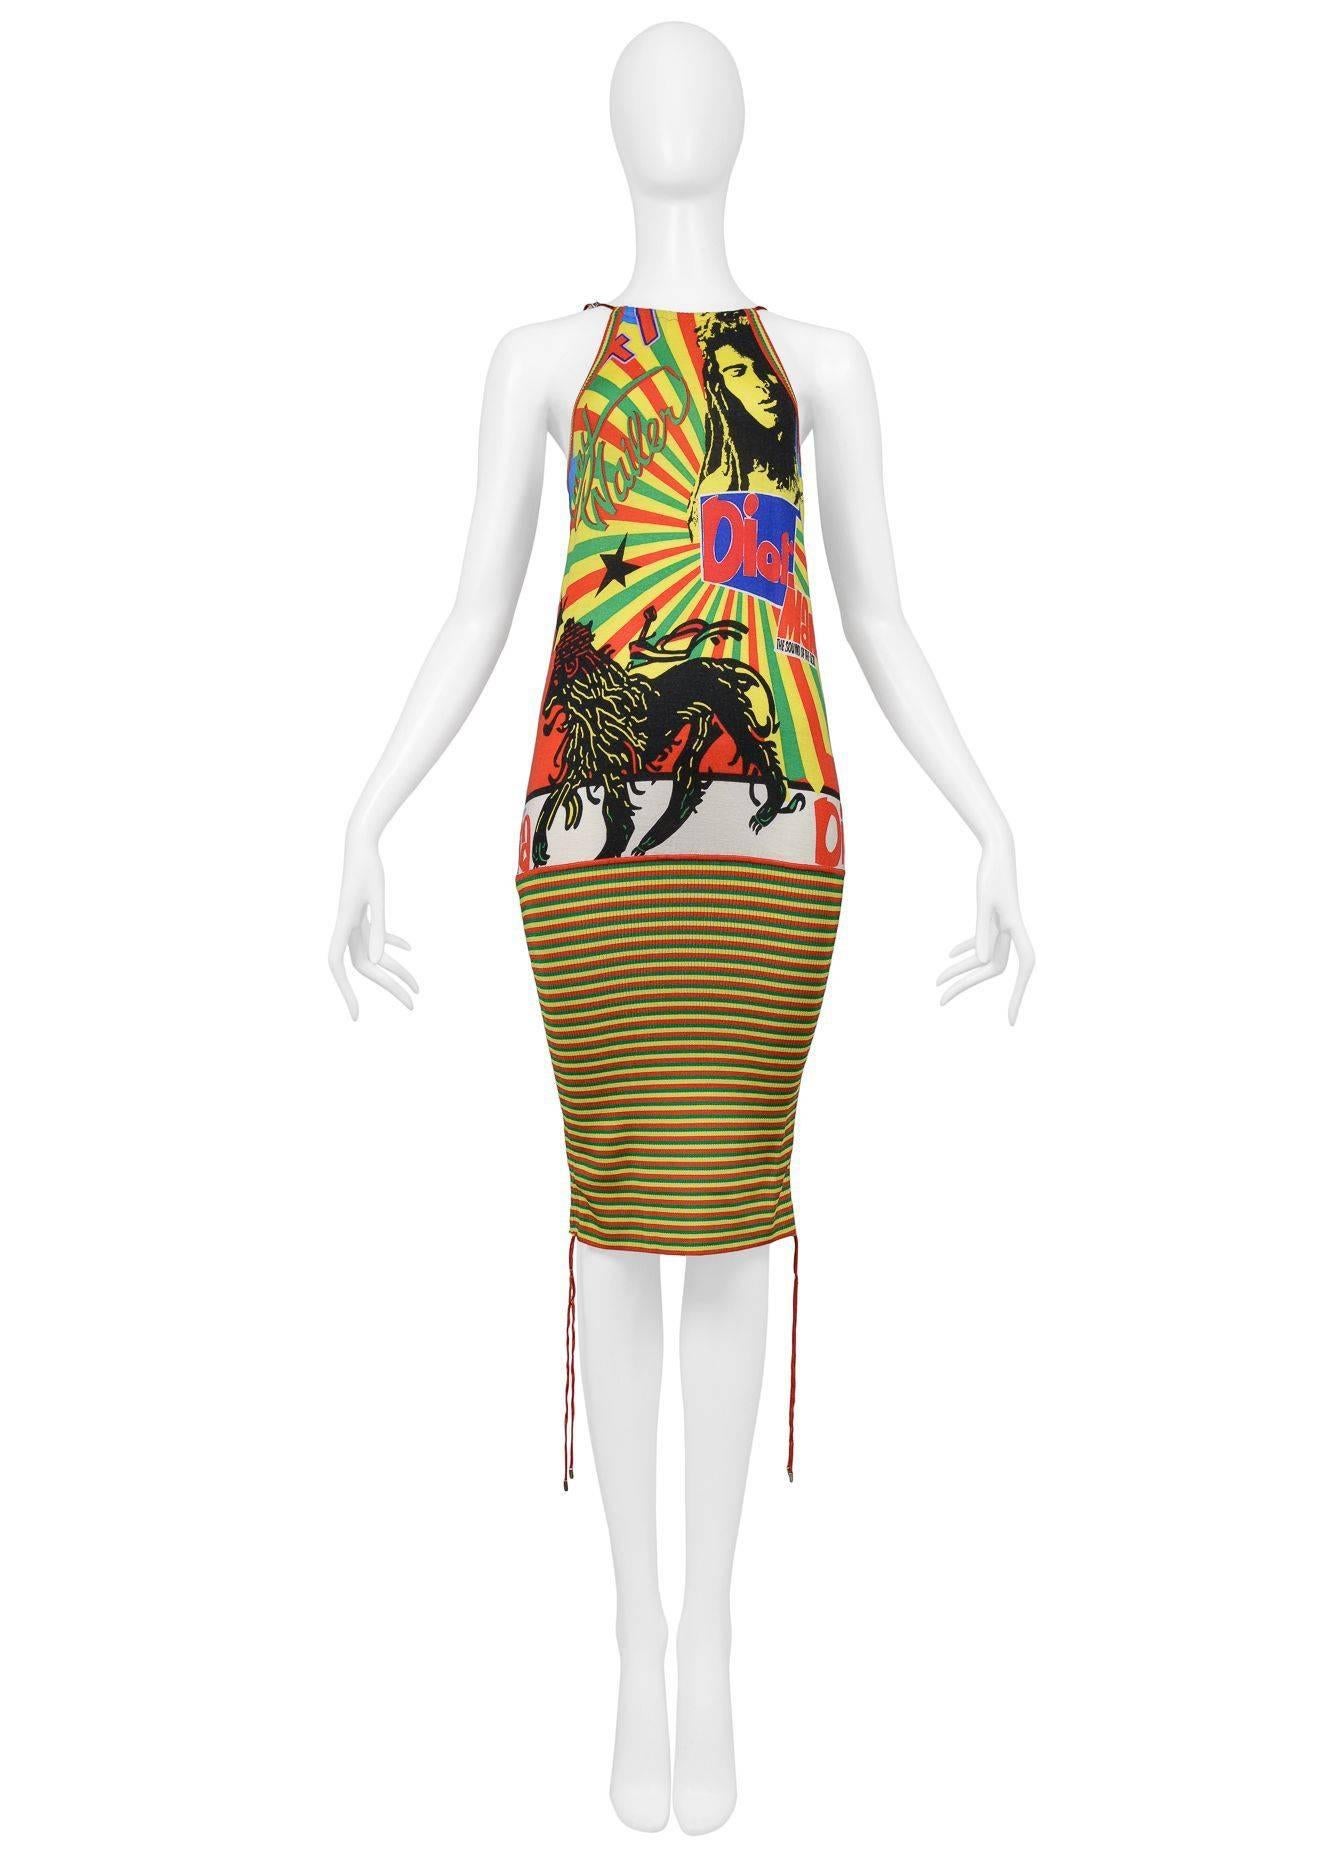 Christian Dior by John Galliano multicolor stripe swimsuit with deep V and grommet cargo straps at bust and across back. Never been worn. Featured on the runway and advertising. Collection SS 2002.